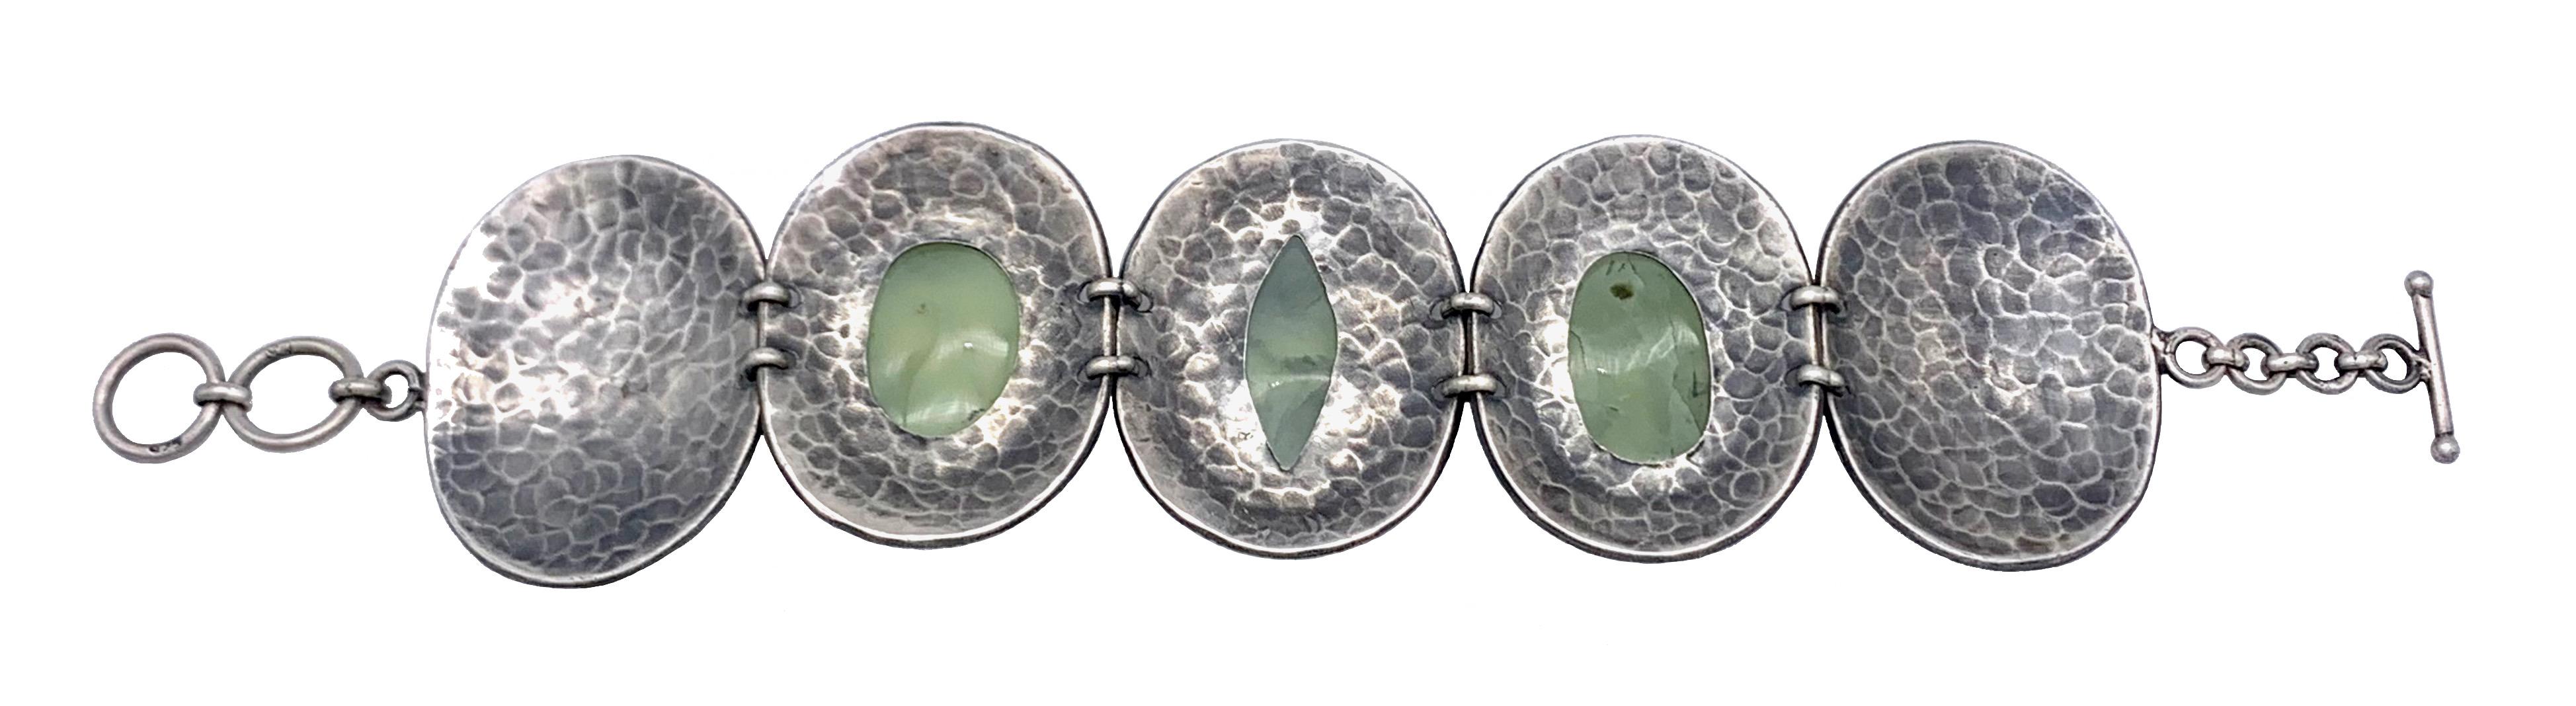 This wonderful chunky silverlink bracelet is set with three unidentified green hardstones. The center stone is the shape of an eye, to either side are two oval stones, all of them in cabochon cut.
The stones are mounted in high, closed settings and